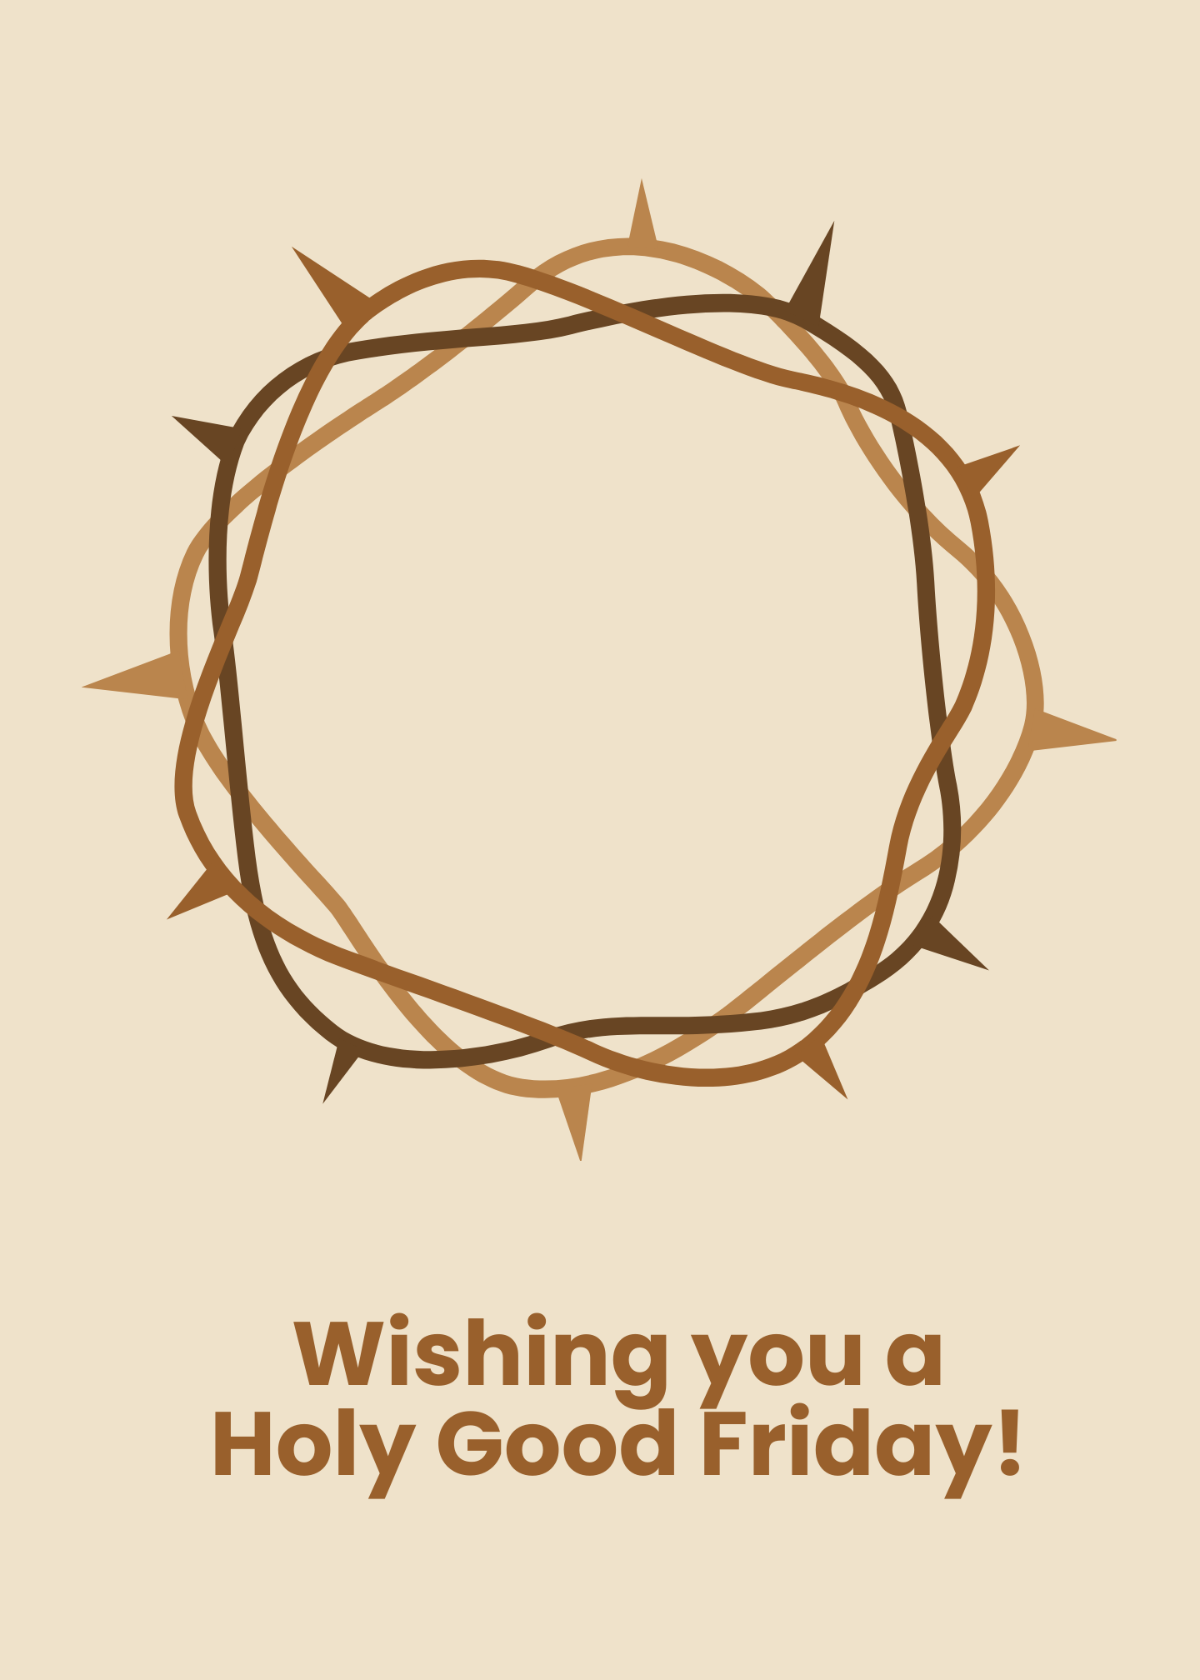 Good Friday Greeting Card Template